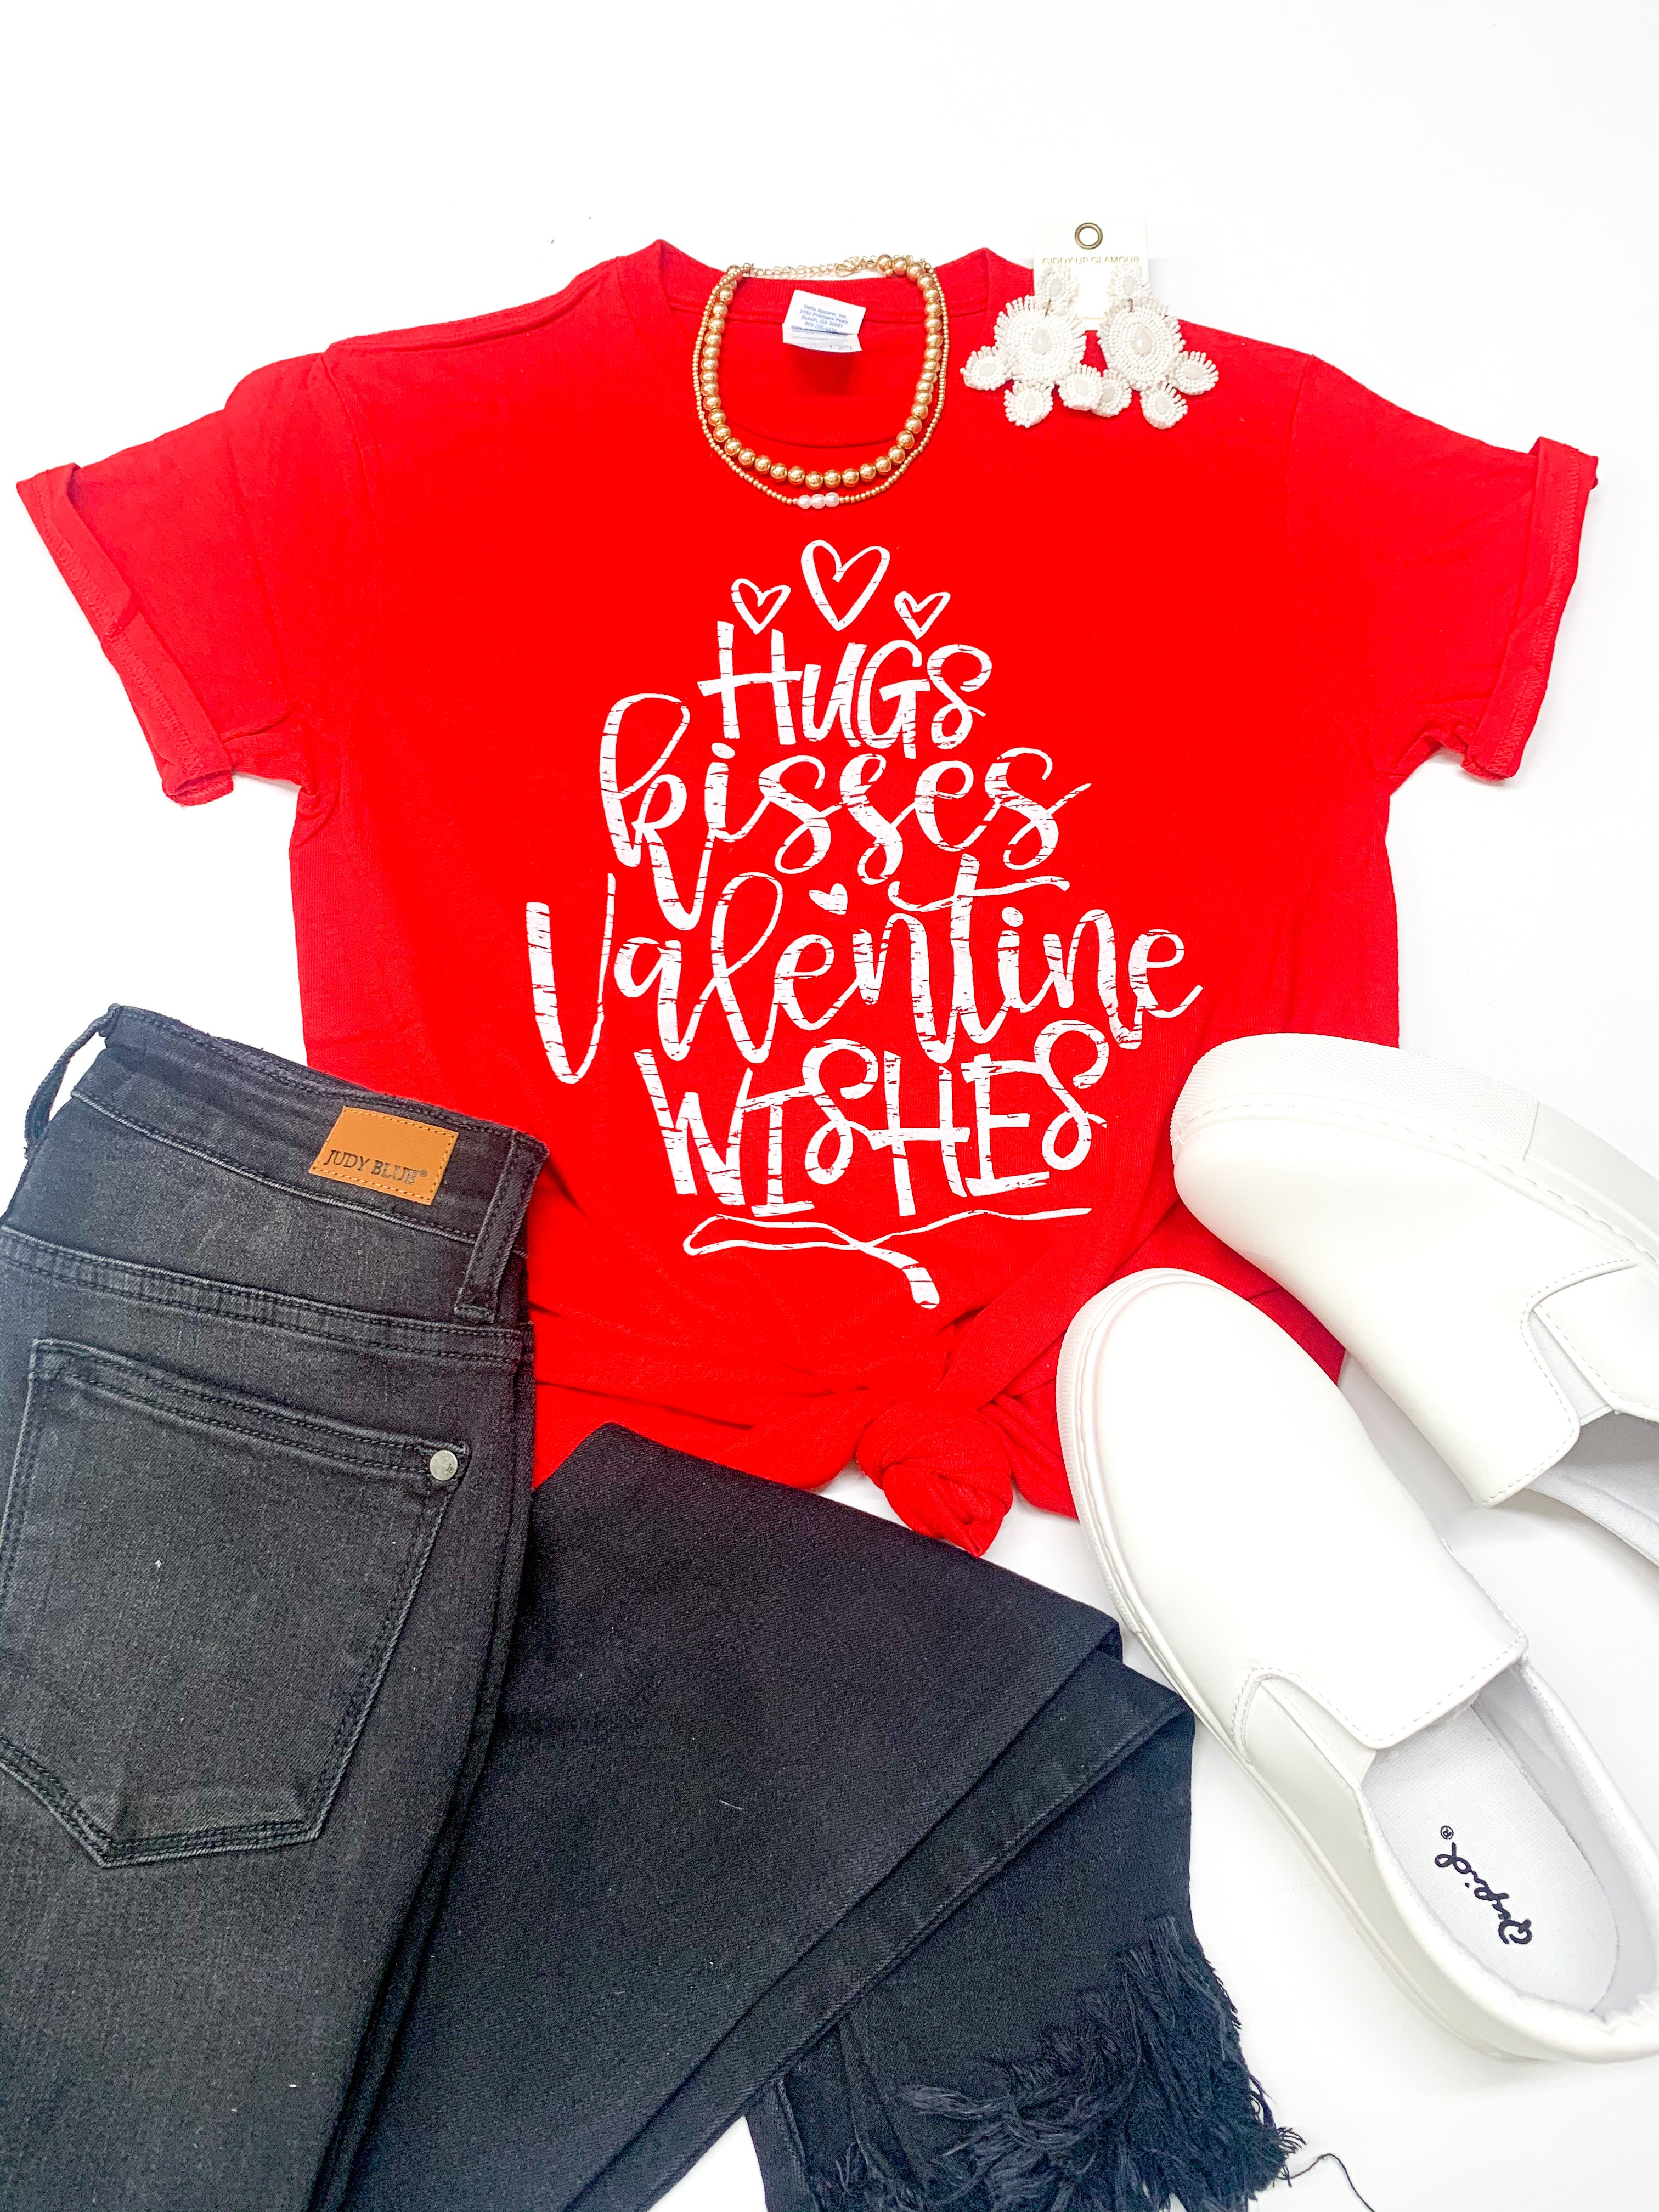 Hugs, Kisses, and Valentine Wishes Graphic Tee in Red - Giddy Up Glamour Boutique